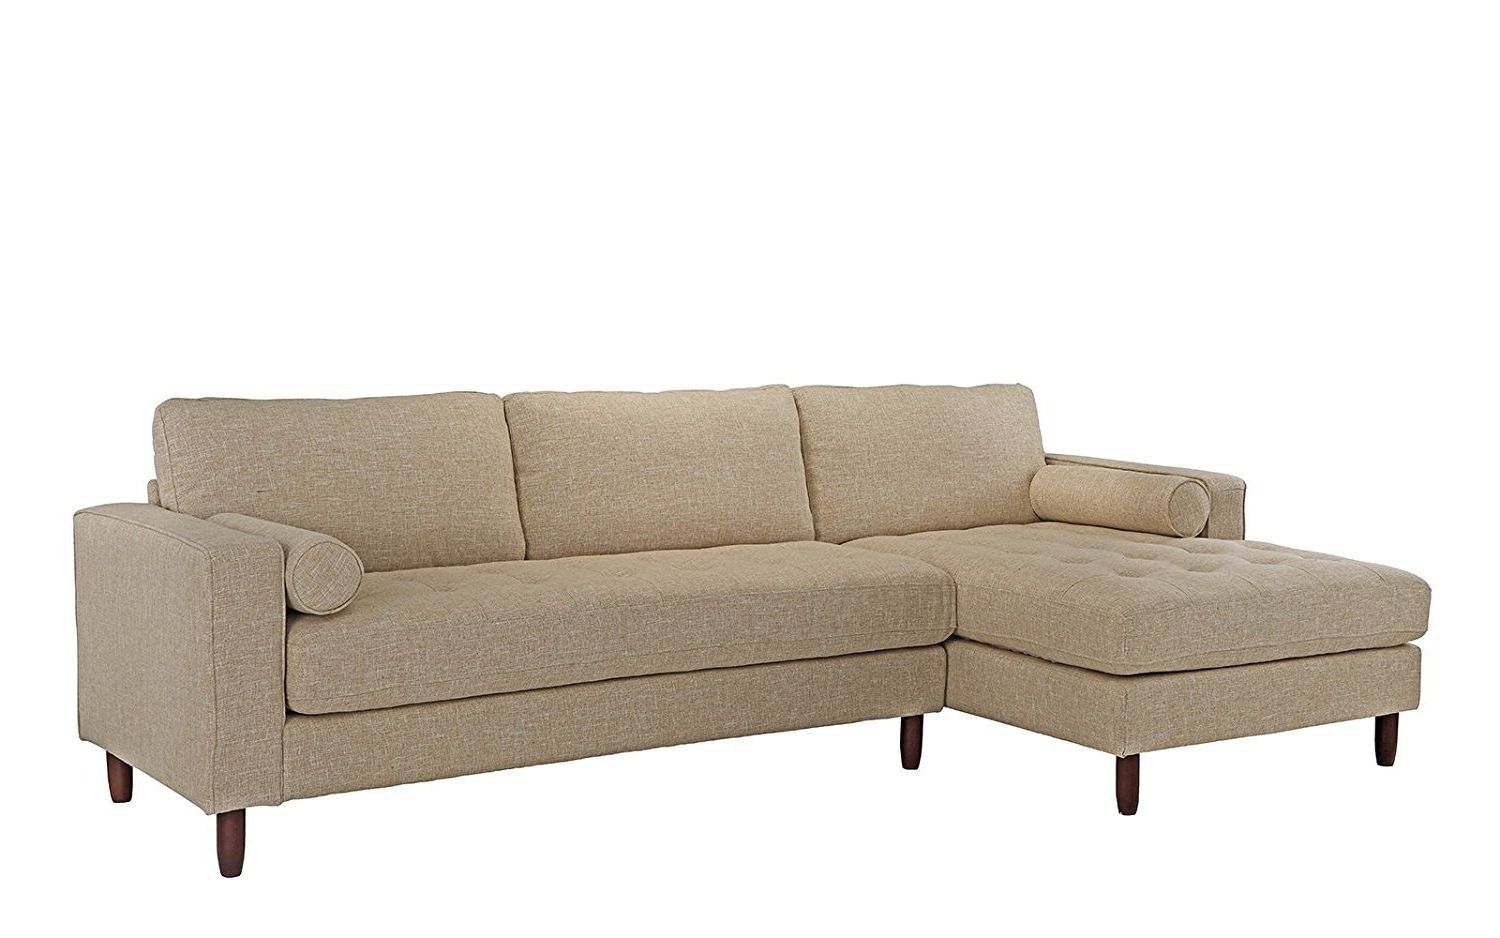 Mid Century Modern Tufted Fabric Sectional Sofa, L Shape Couch Beige For Beige L Shaped Sectional Sofas (View 8 of 20)